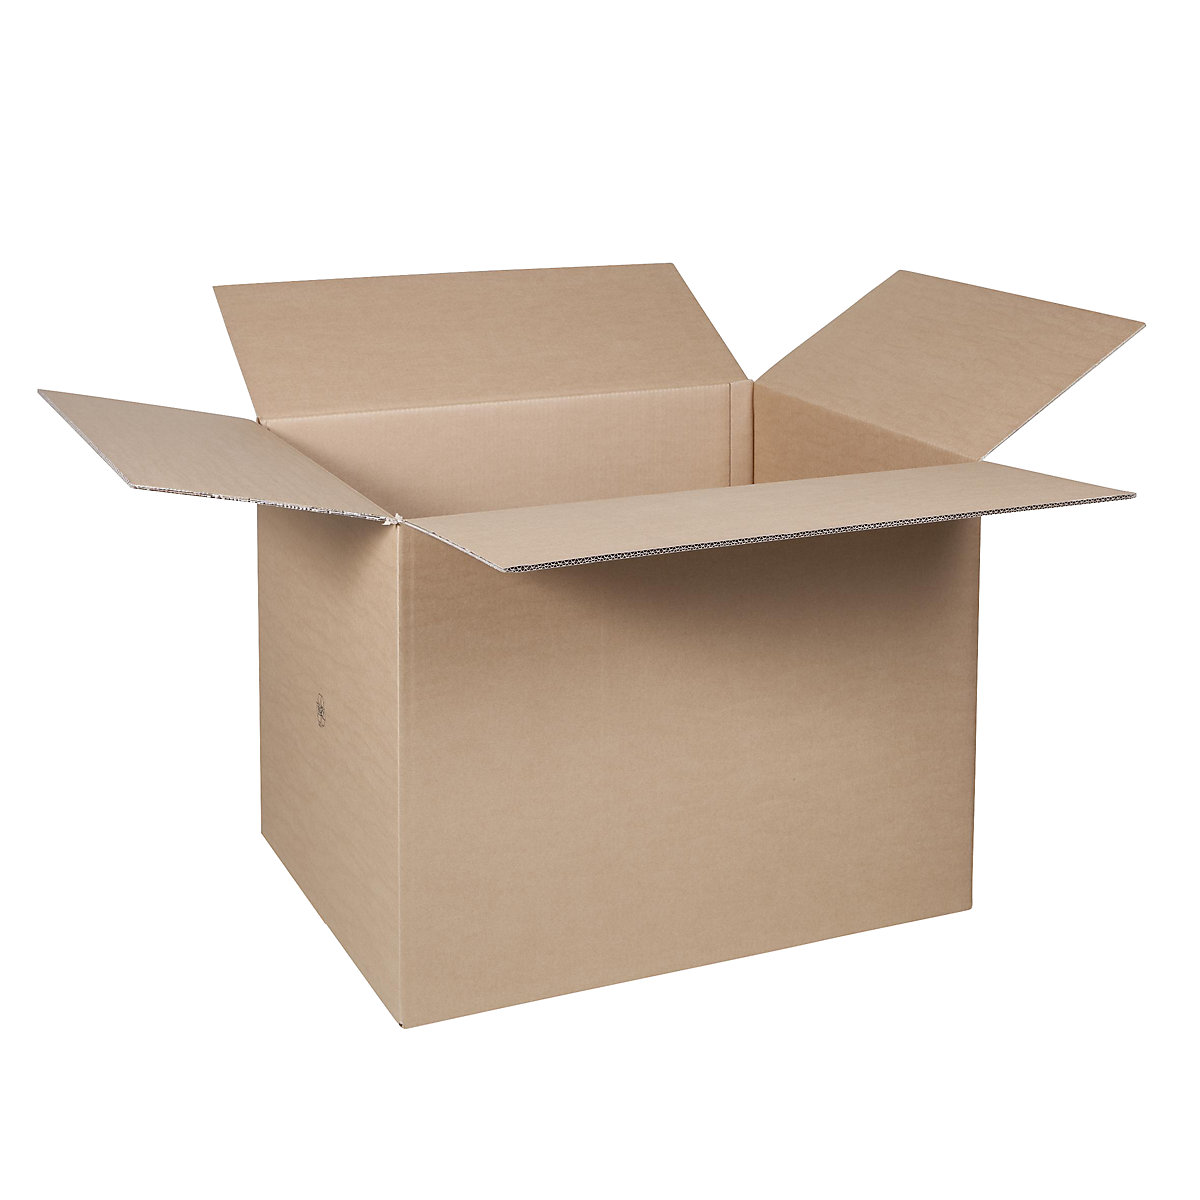 Folding cardboard box, FEFCO 0201, made of double fluted cardboard, internal dimensions 700 x 400 x 400 mm, pack of 100-10